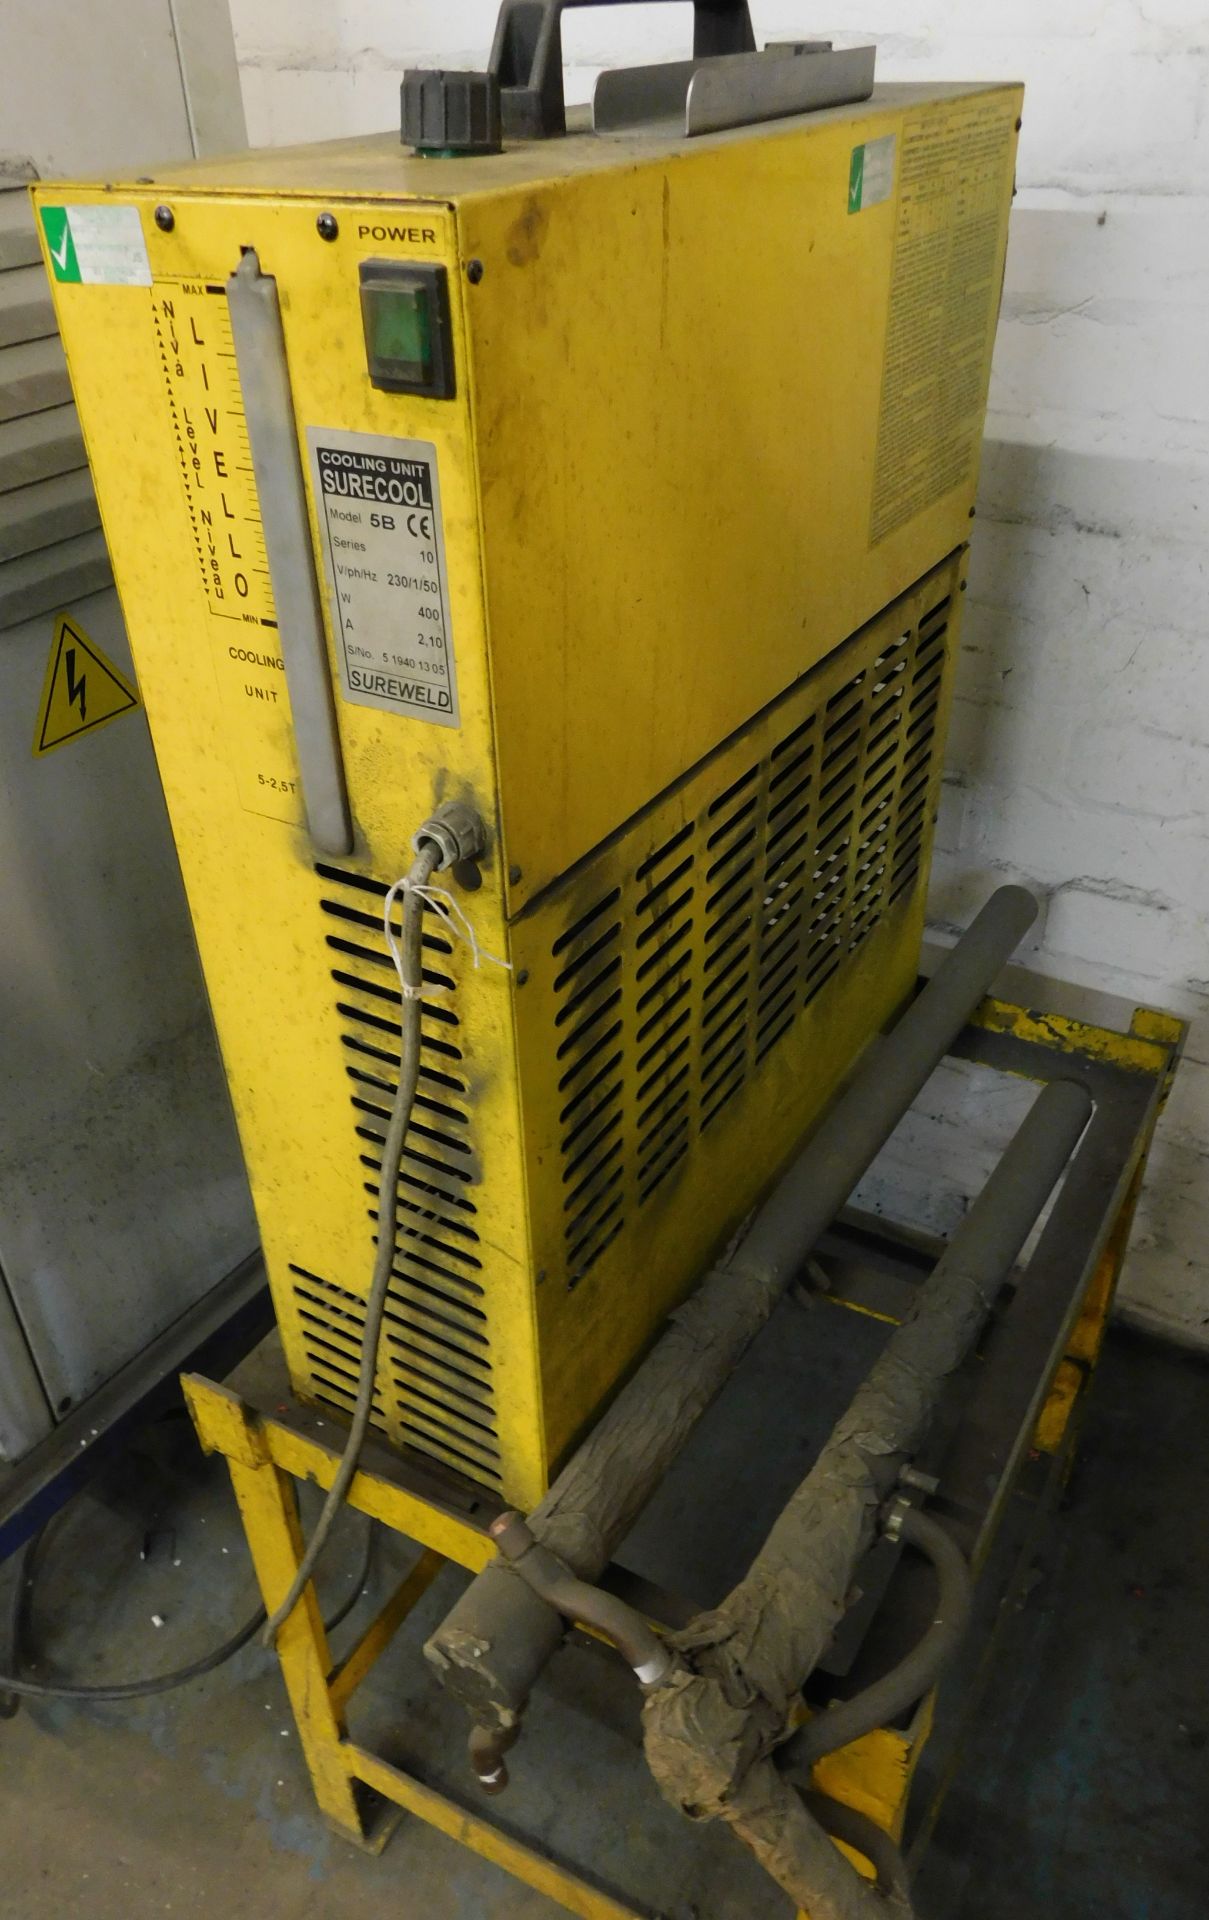 Lecco Type ZP 26 Spot Welder, Serial Number IE318 003 with Sureweld Surecool Model 5B Cooling - Image 5 of 6